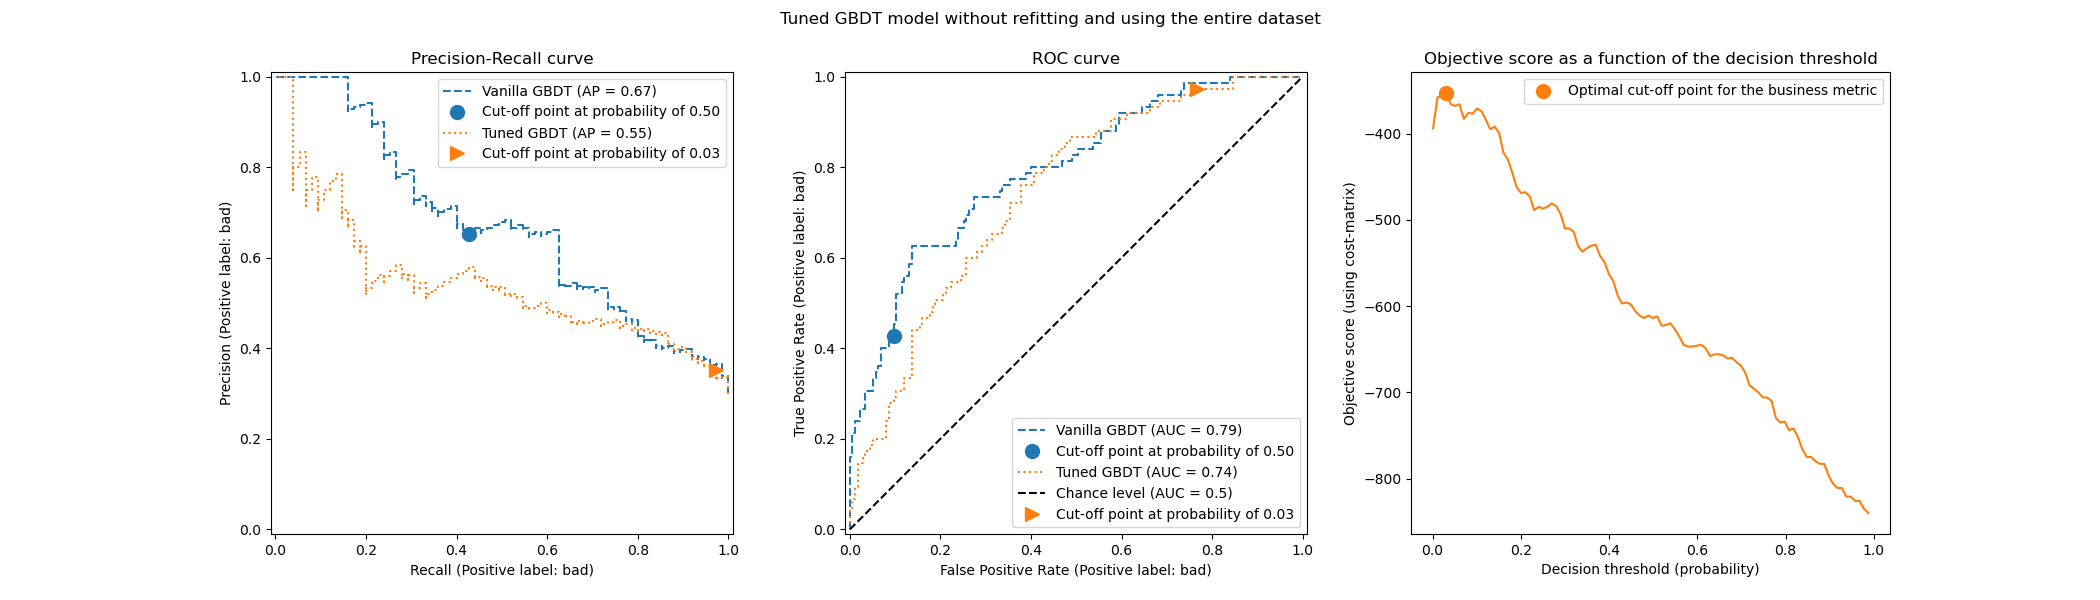 Tuned GBDT model without refitting and using the entire dataset, Precision-Recall curve, ROC curve, Objective score as a function of the decision threshold